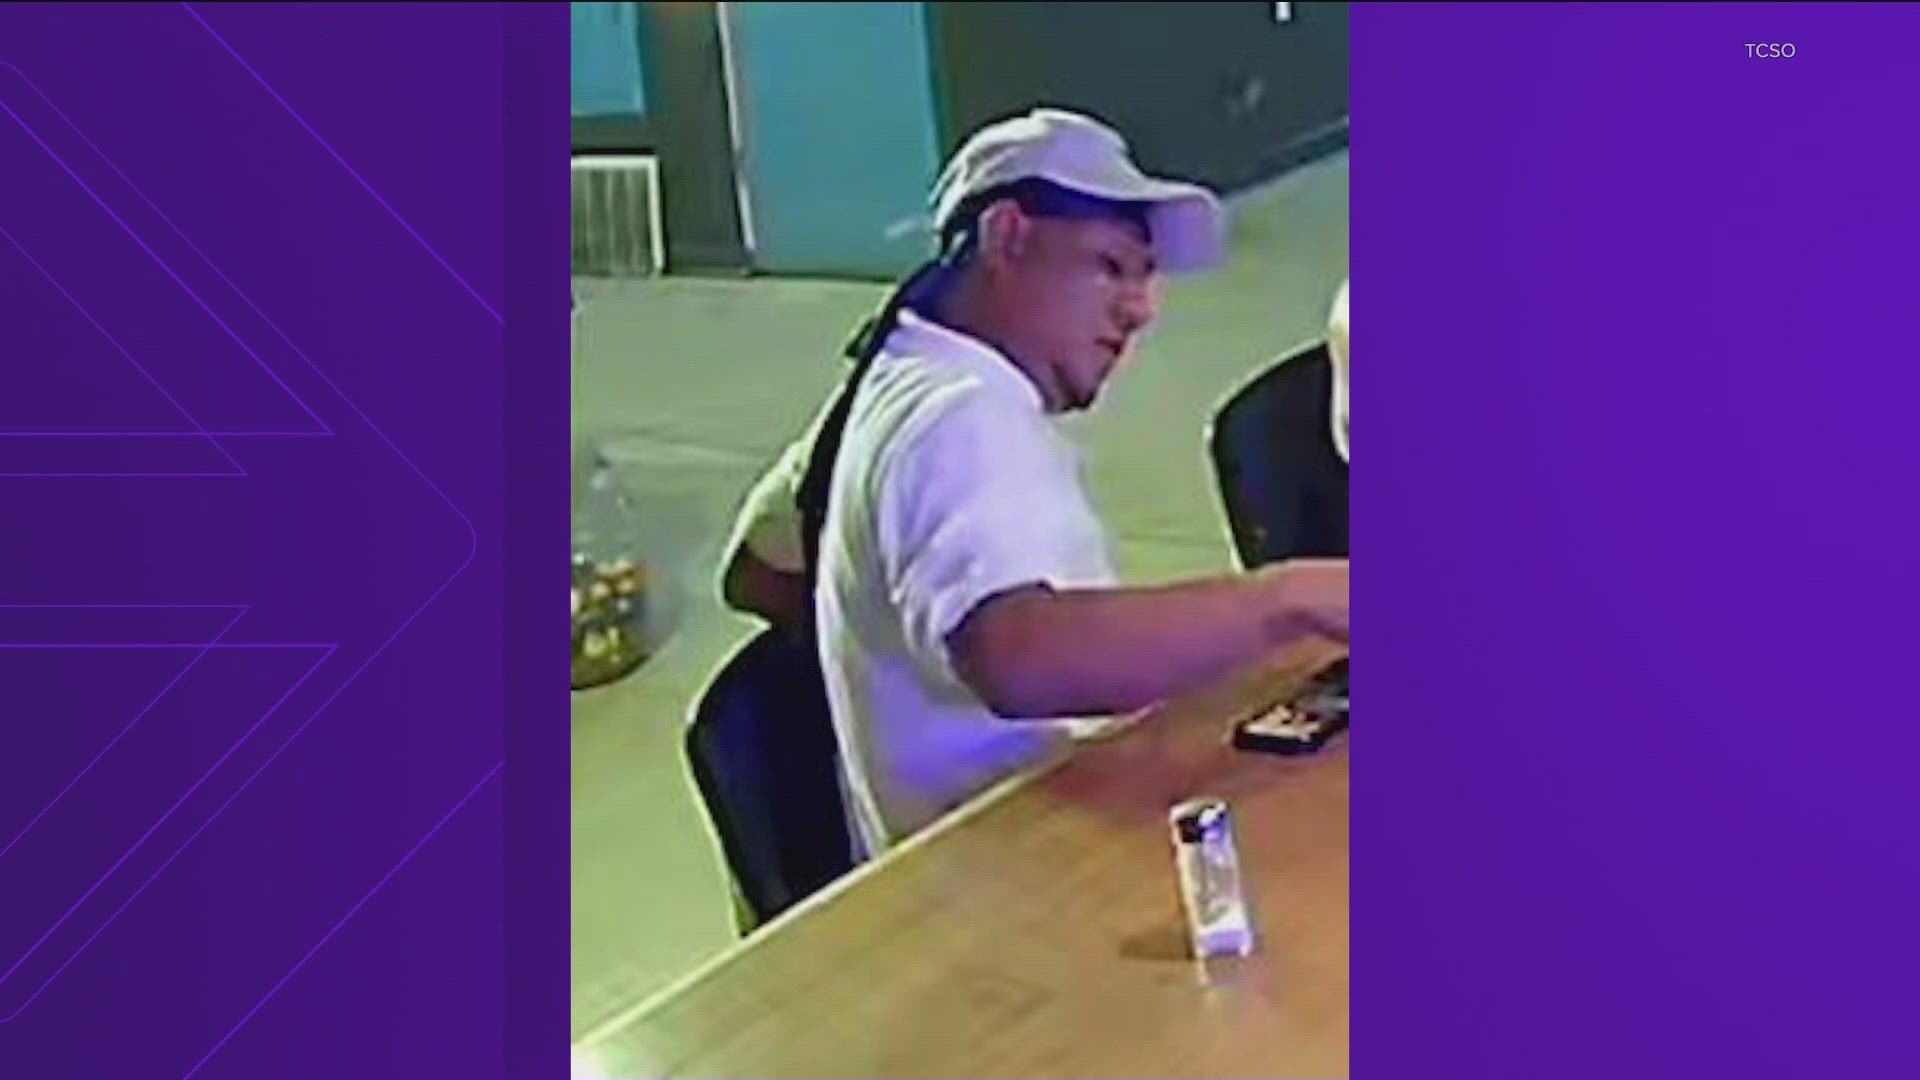 The Travis County Sheriff's Office released photos of the suspect on Saturday.